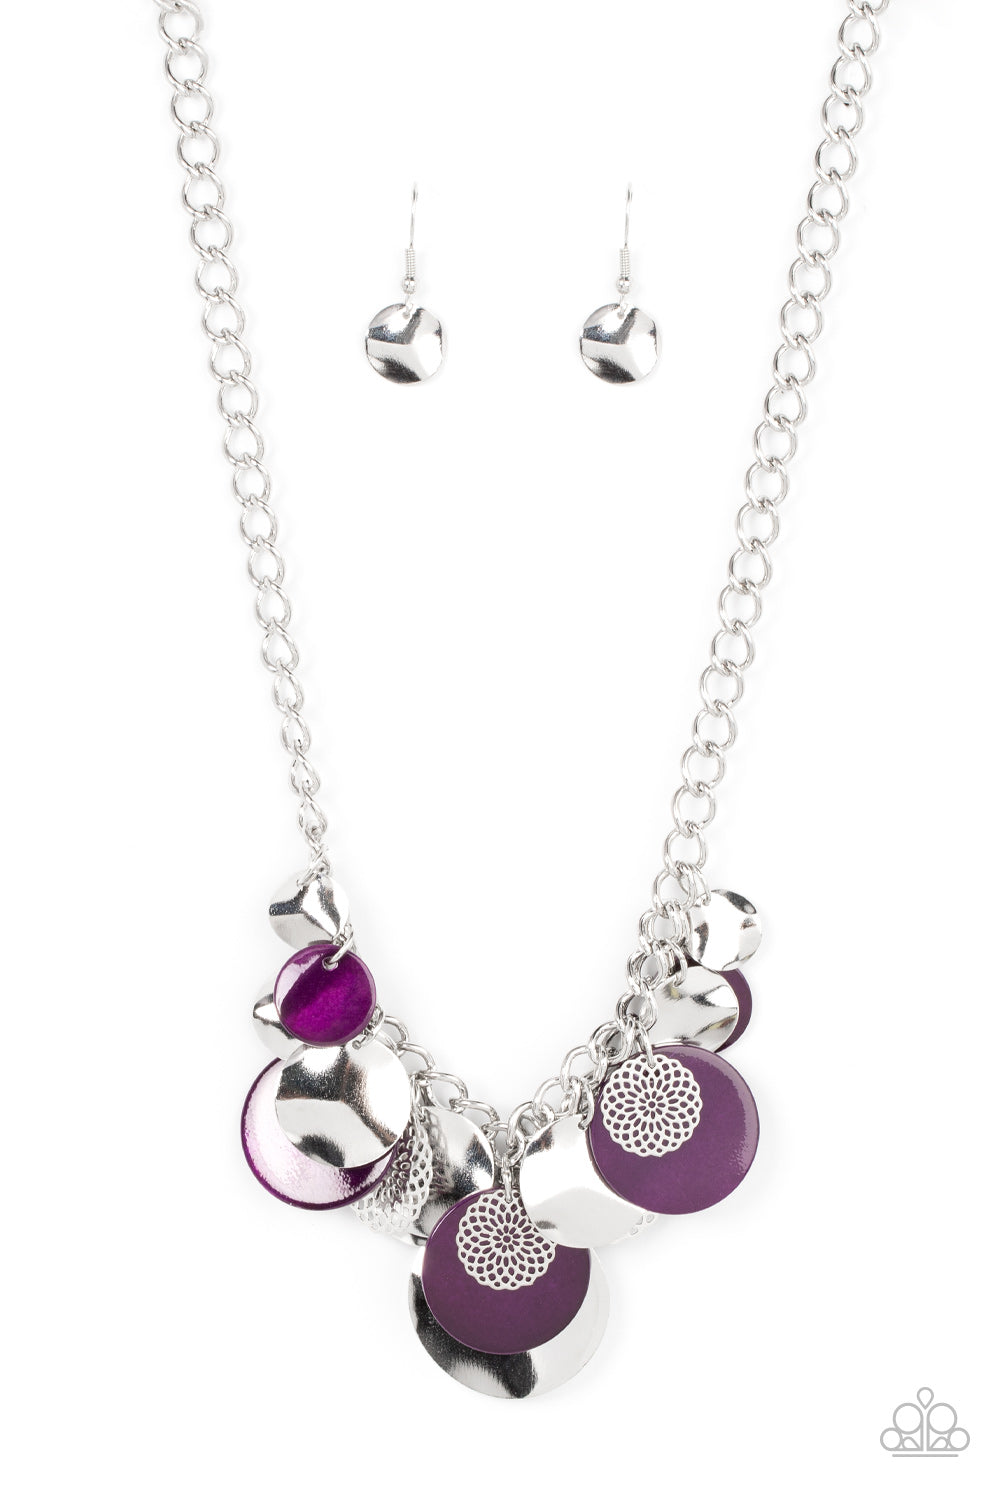 Oceanic Opera - Purple and Silver Necklace - Paparazzi Accessories - A summery collection of bent silver discs, plum shell-like discs, and silver mandala-like accents cascades from a pair of layered silver chains, resulting in a bubbly and boisterous fringe below the collar. Features an adjustable clasp closure. Sold as one individual necklace.